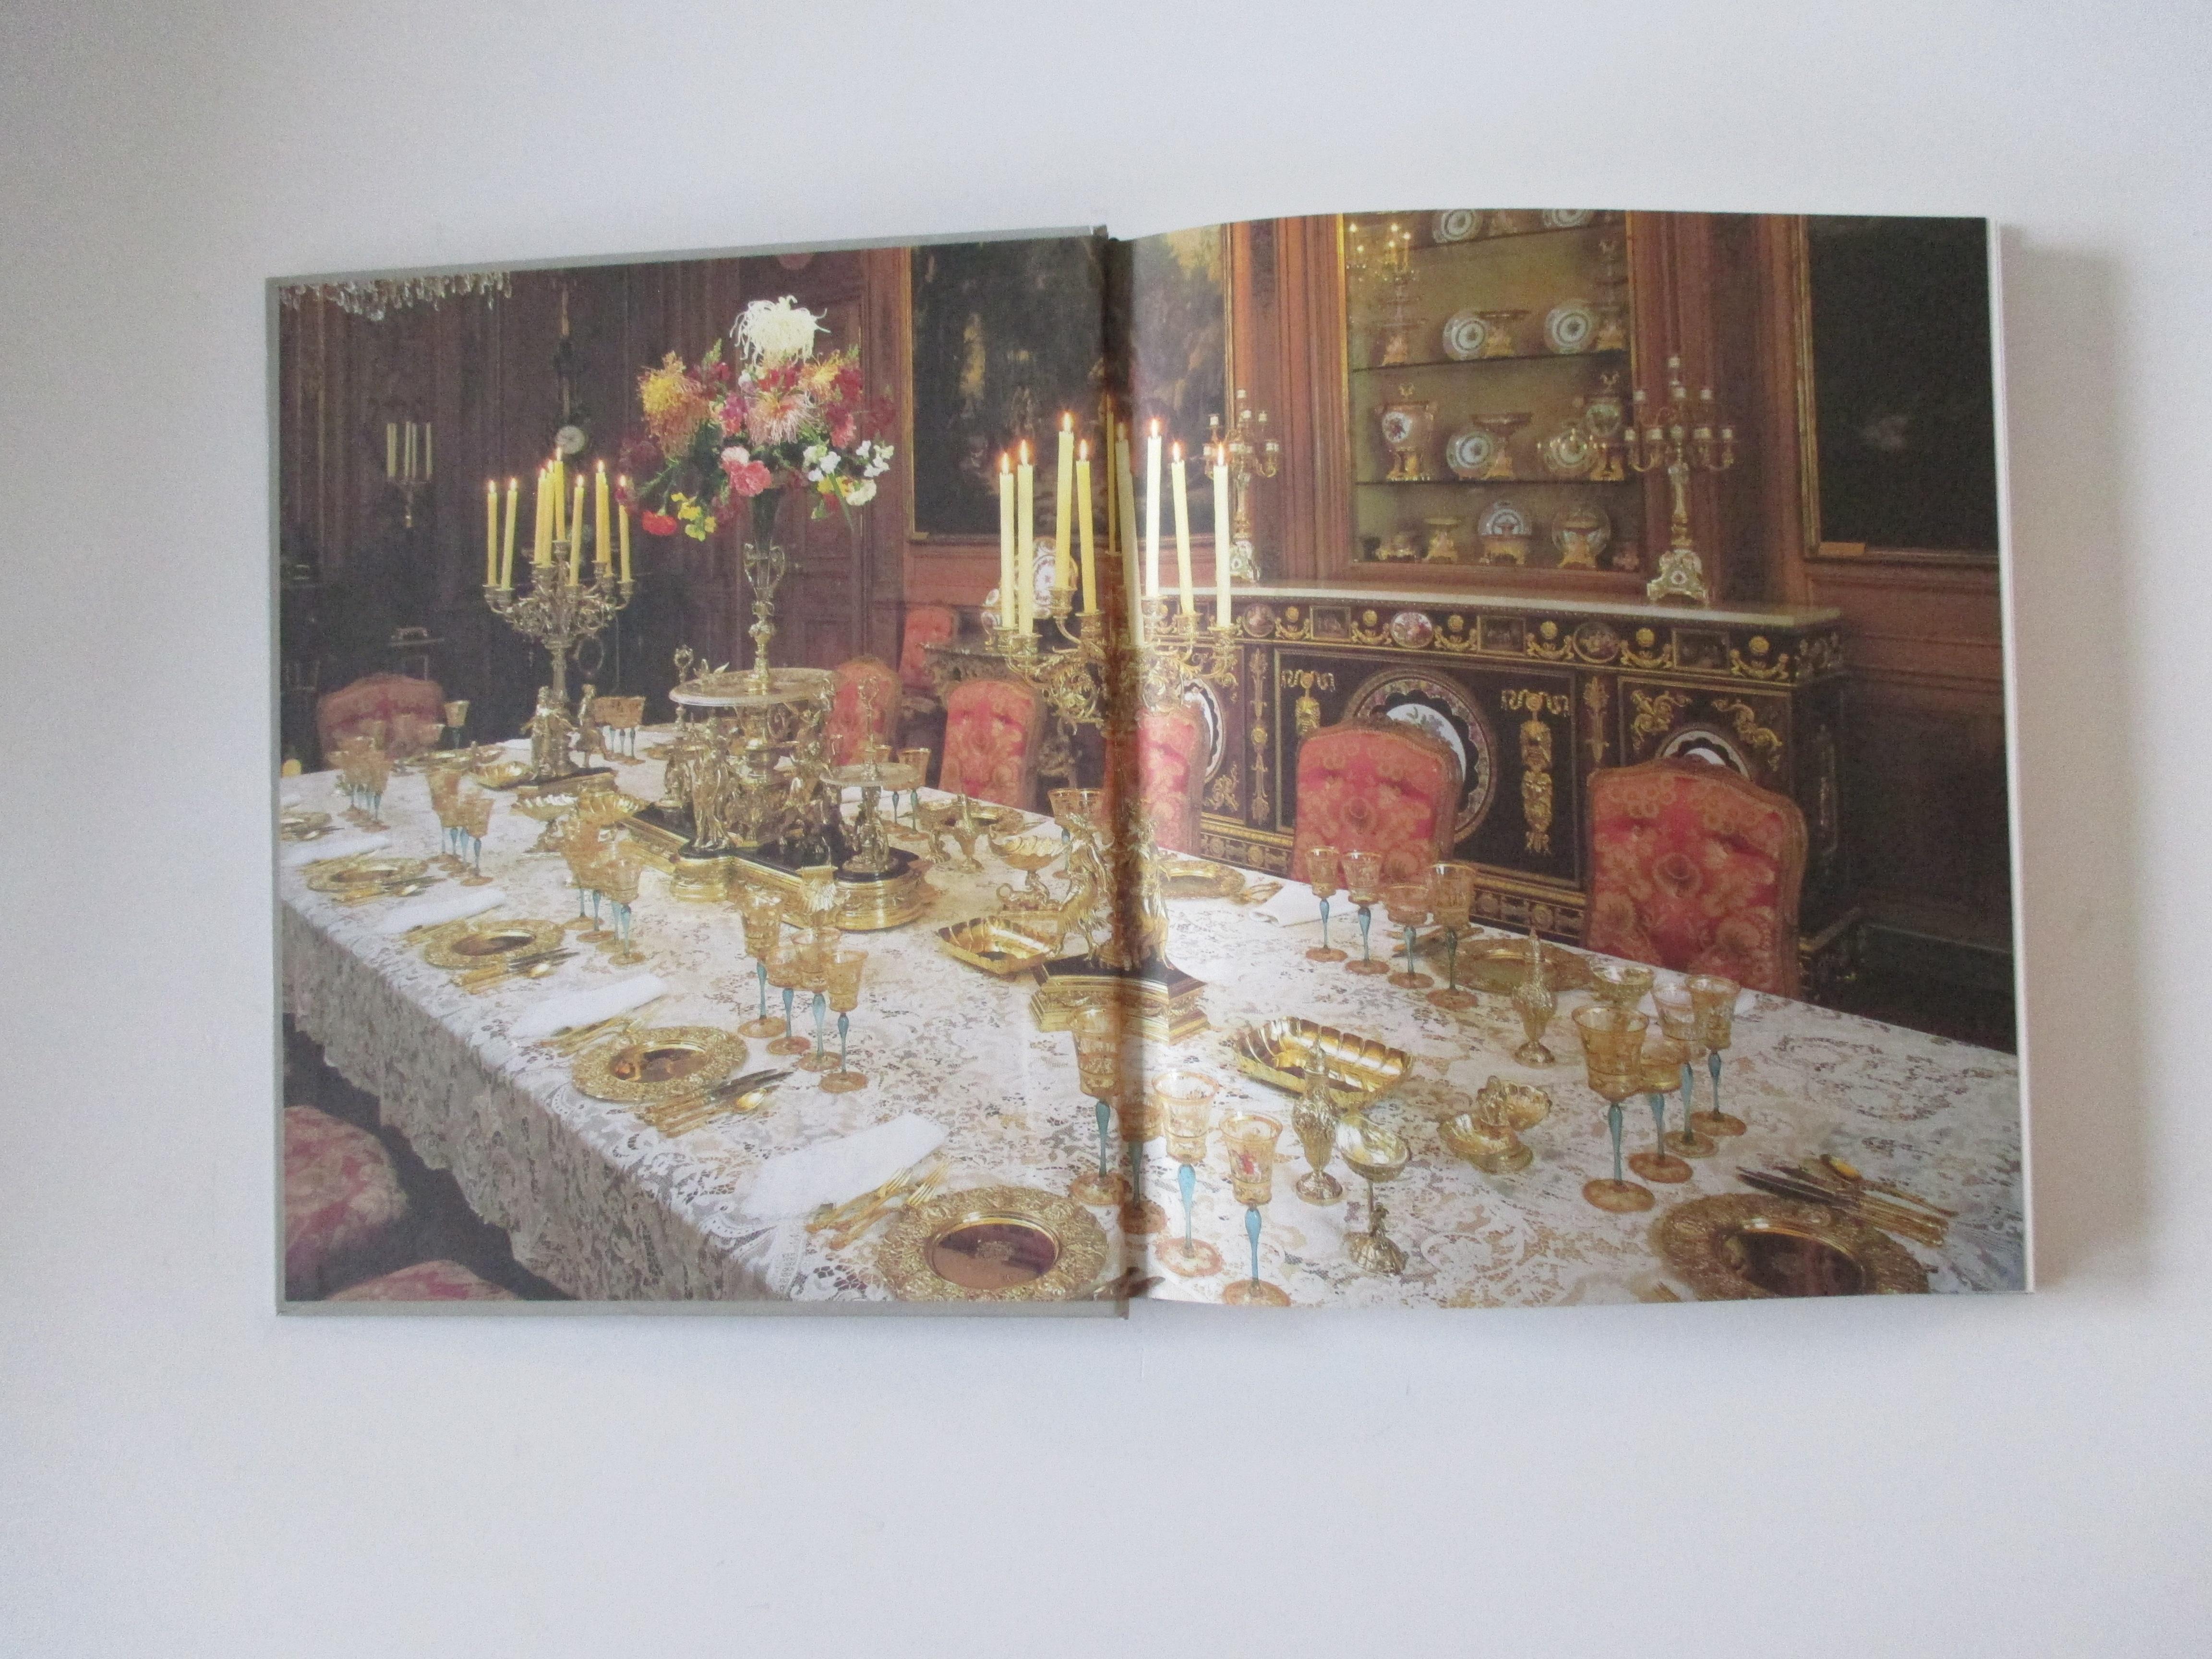 Entertaining with elegance vintage book by Marjorie Merriweather post
Set inside a box
Size: 12 x 8 x 0.25
Hardcover
160 pages,
USA, 1994.